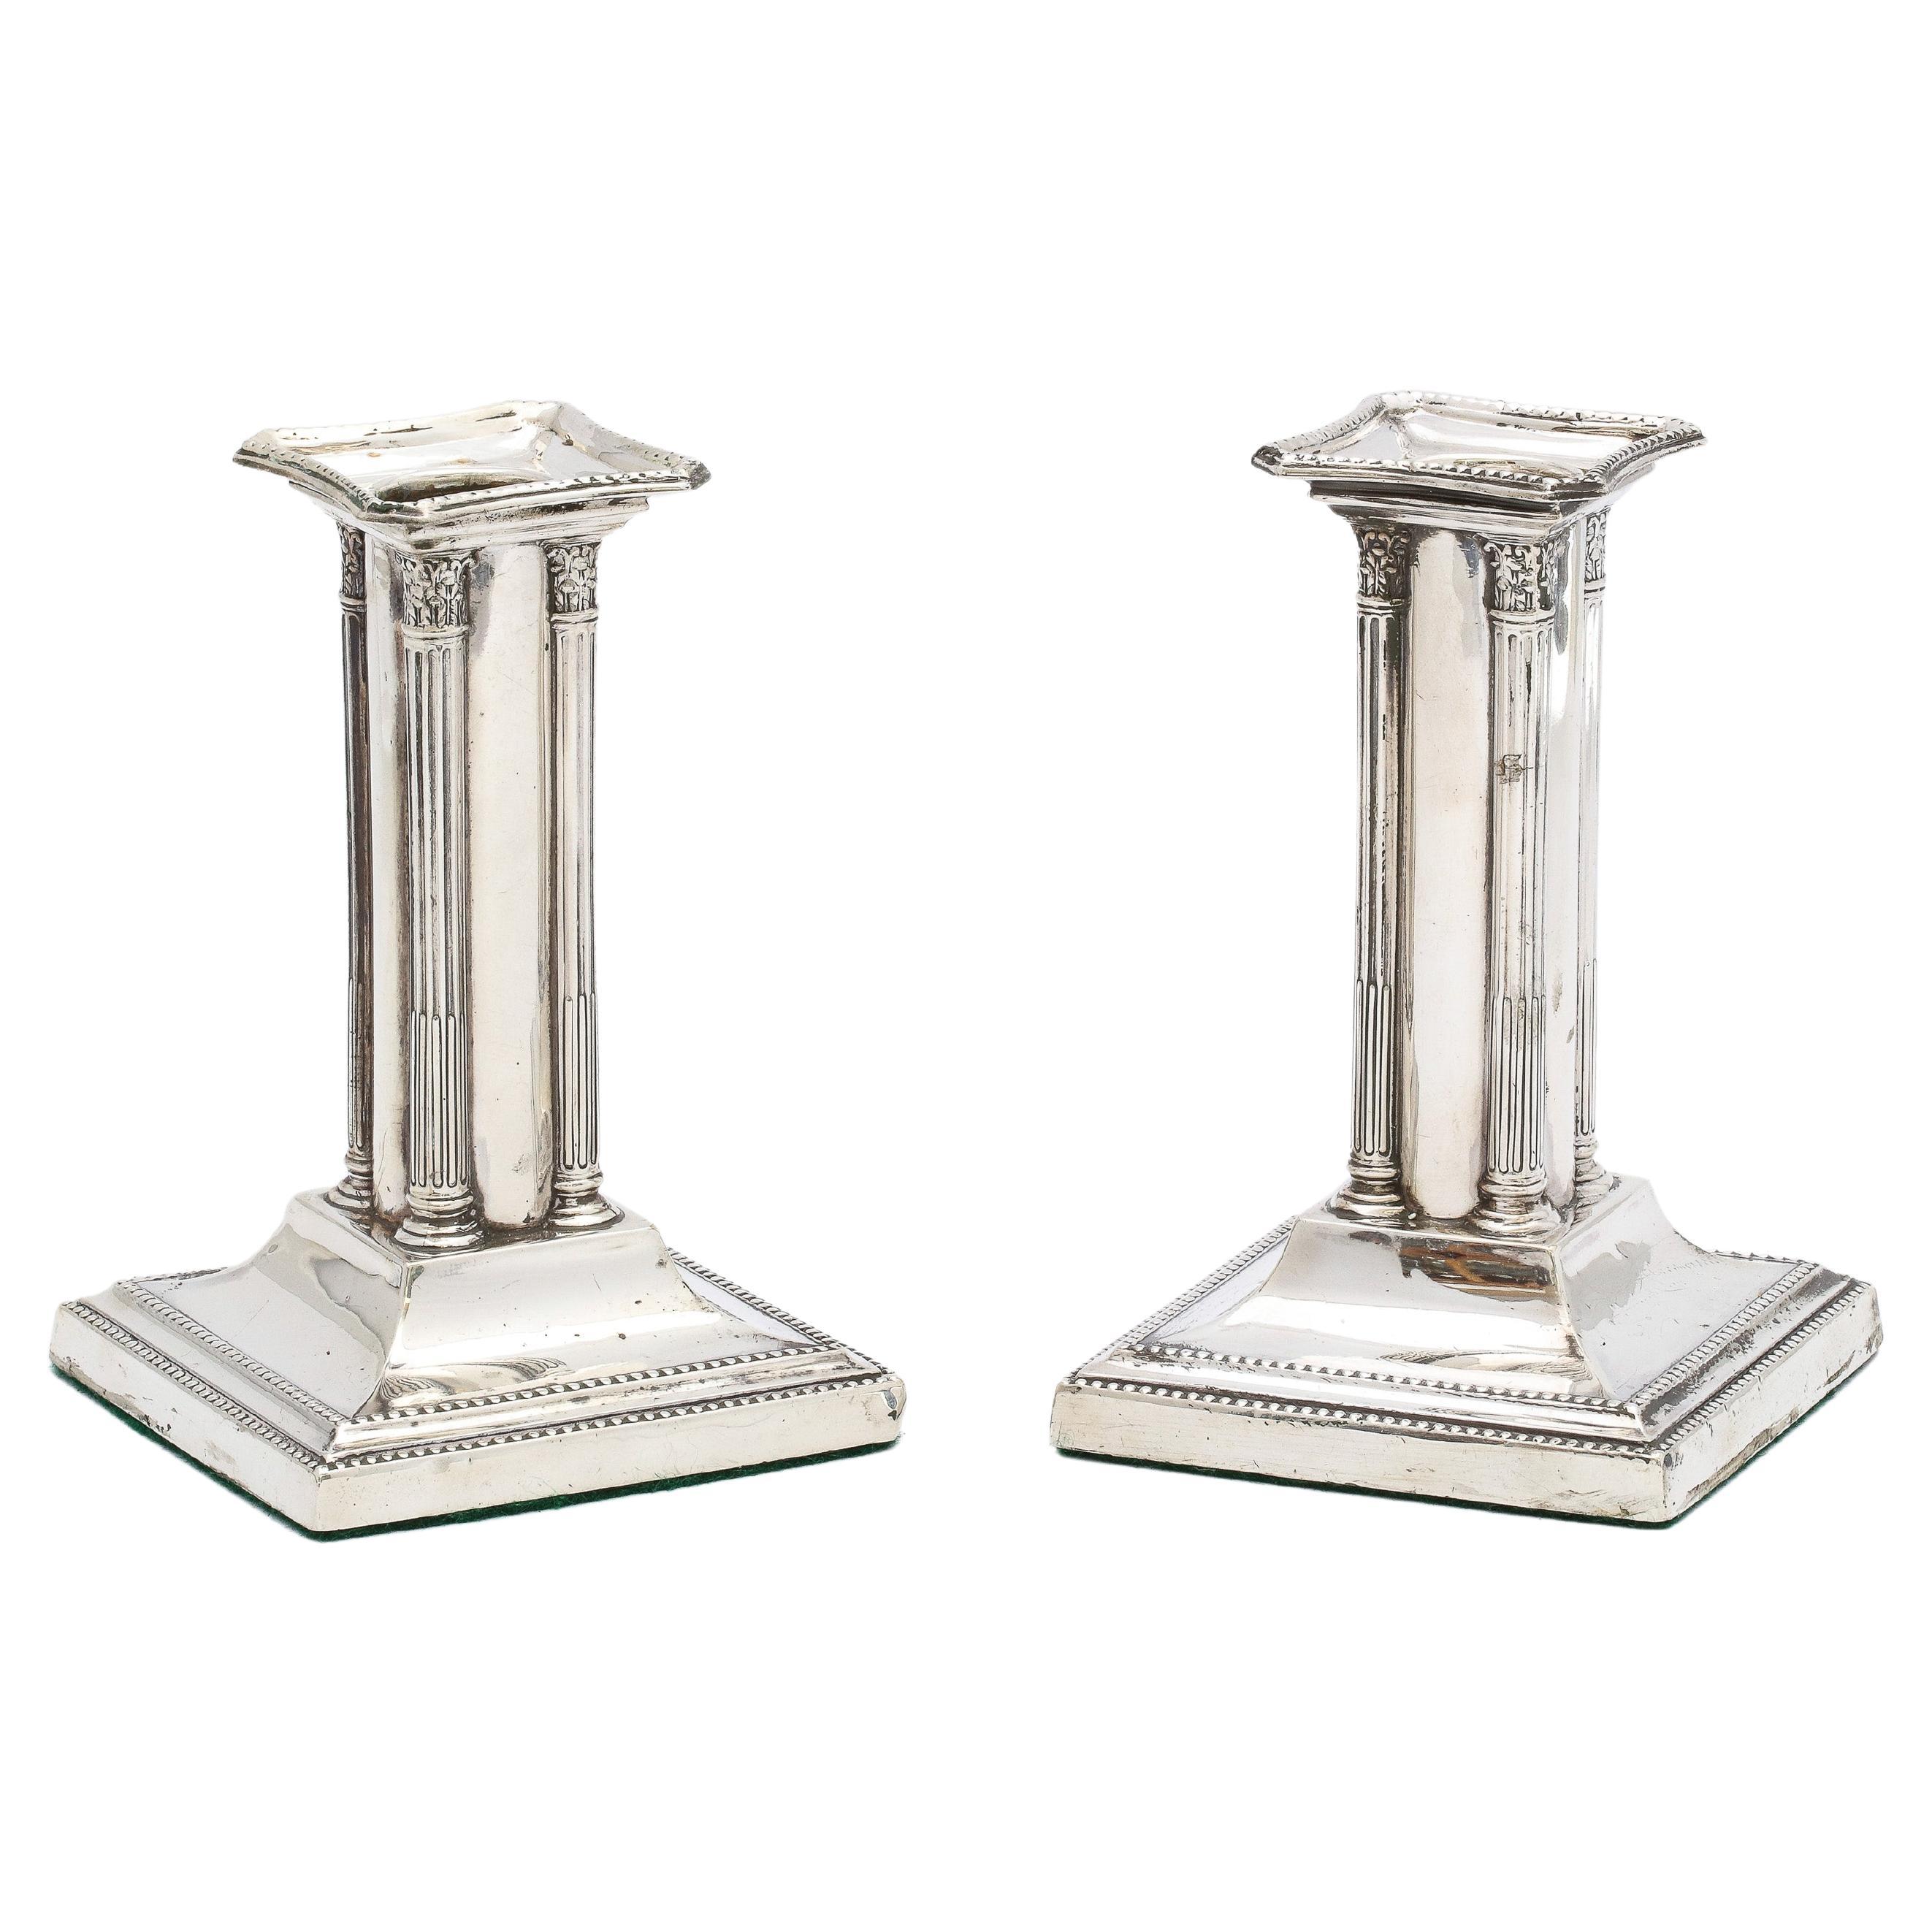 Unusual Pair of Edwardian Period Neoclassical Style Sterling Silver Candlesticks